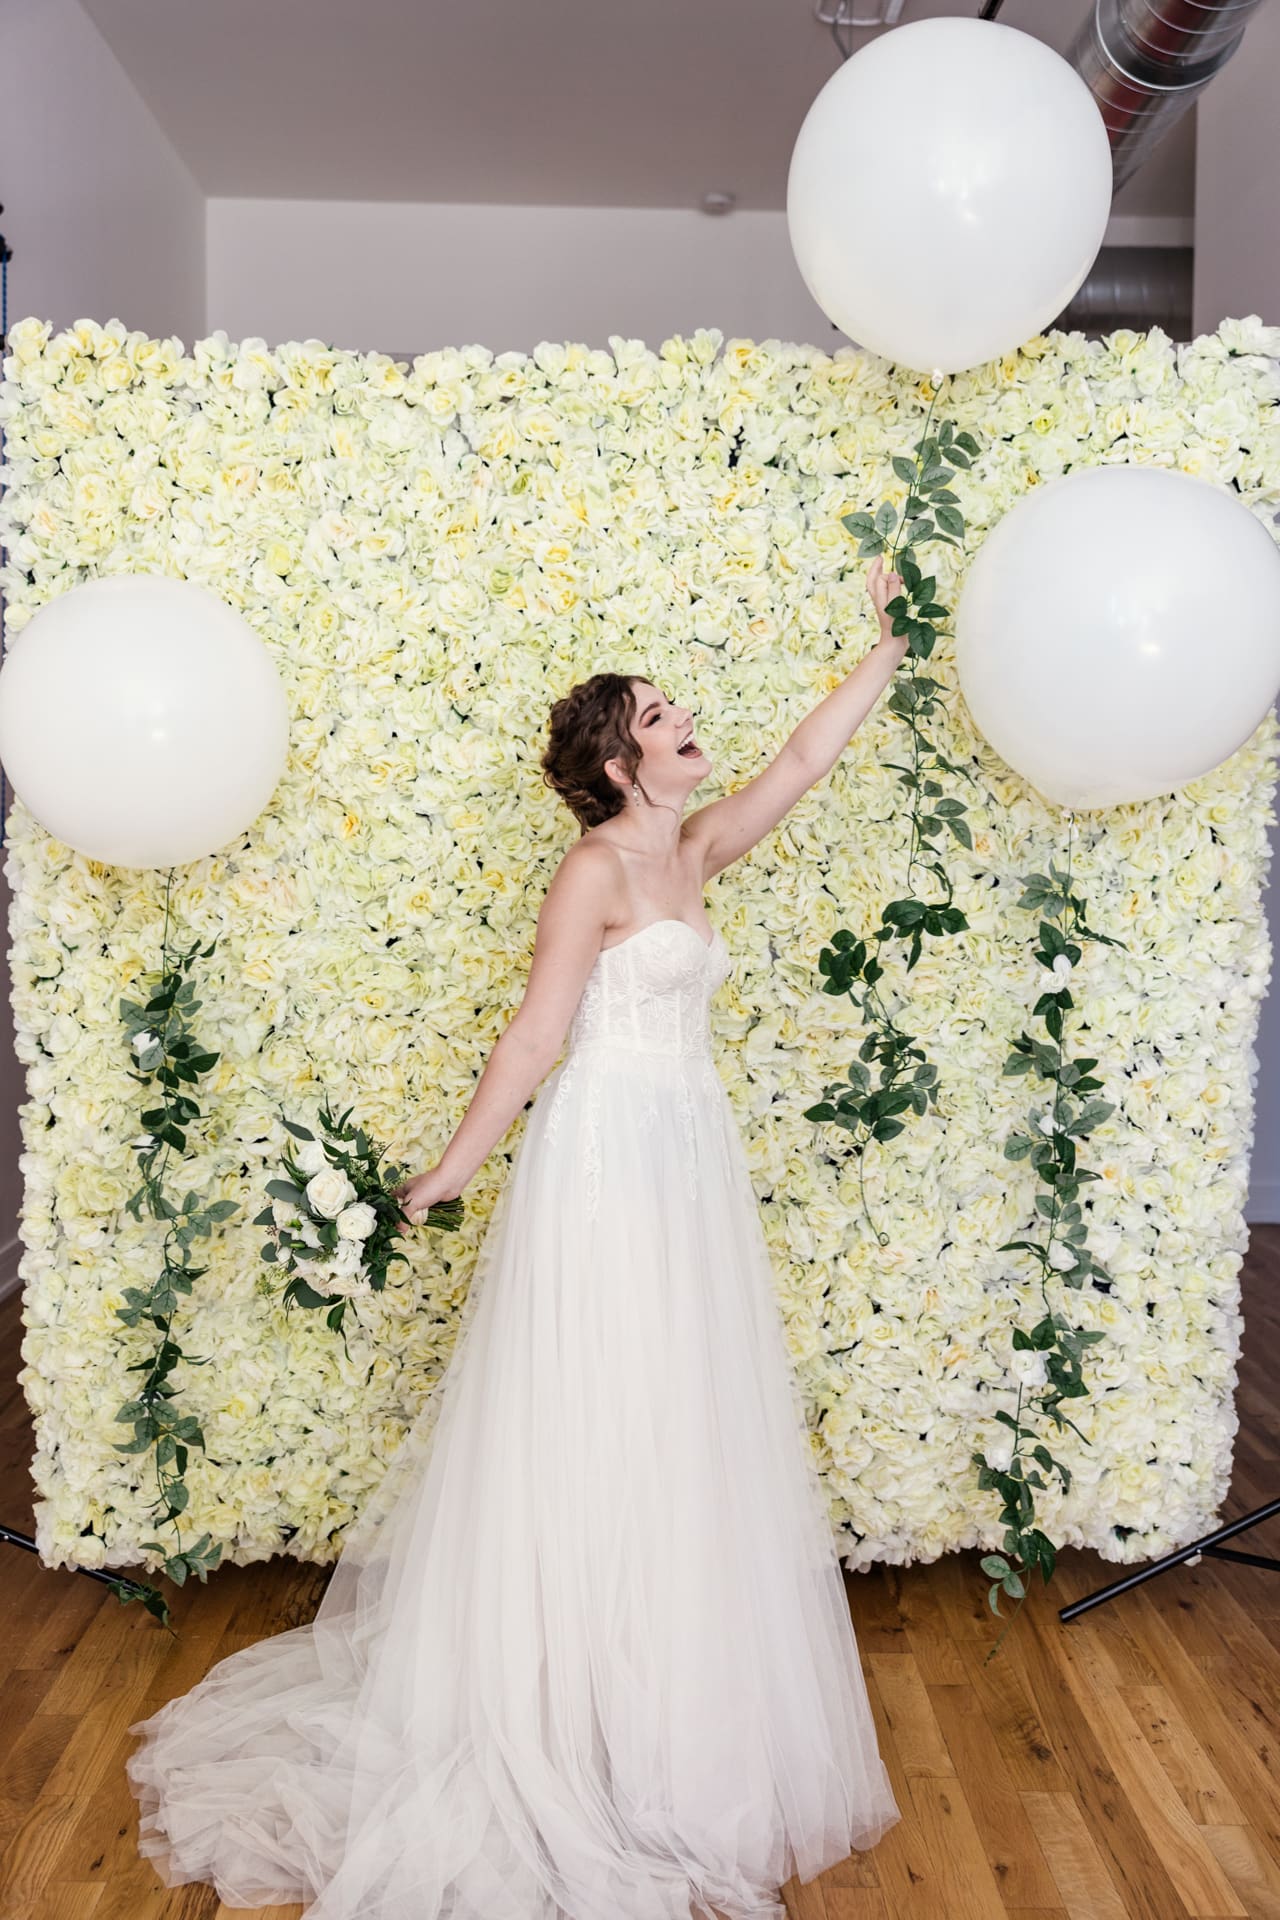 Fun portrait of bride holding giant balloon in front of white floral backdrop at Chicago photography studio P&M Studio